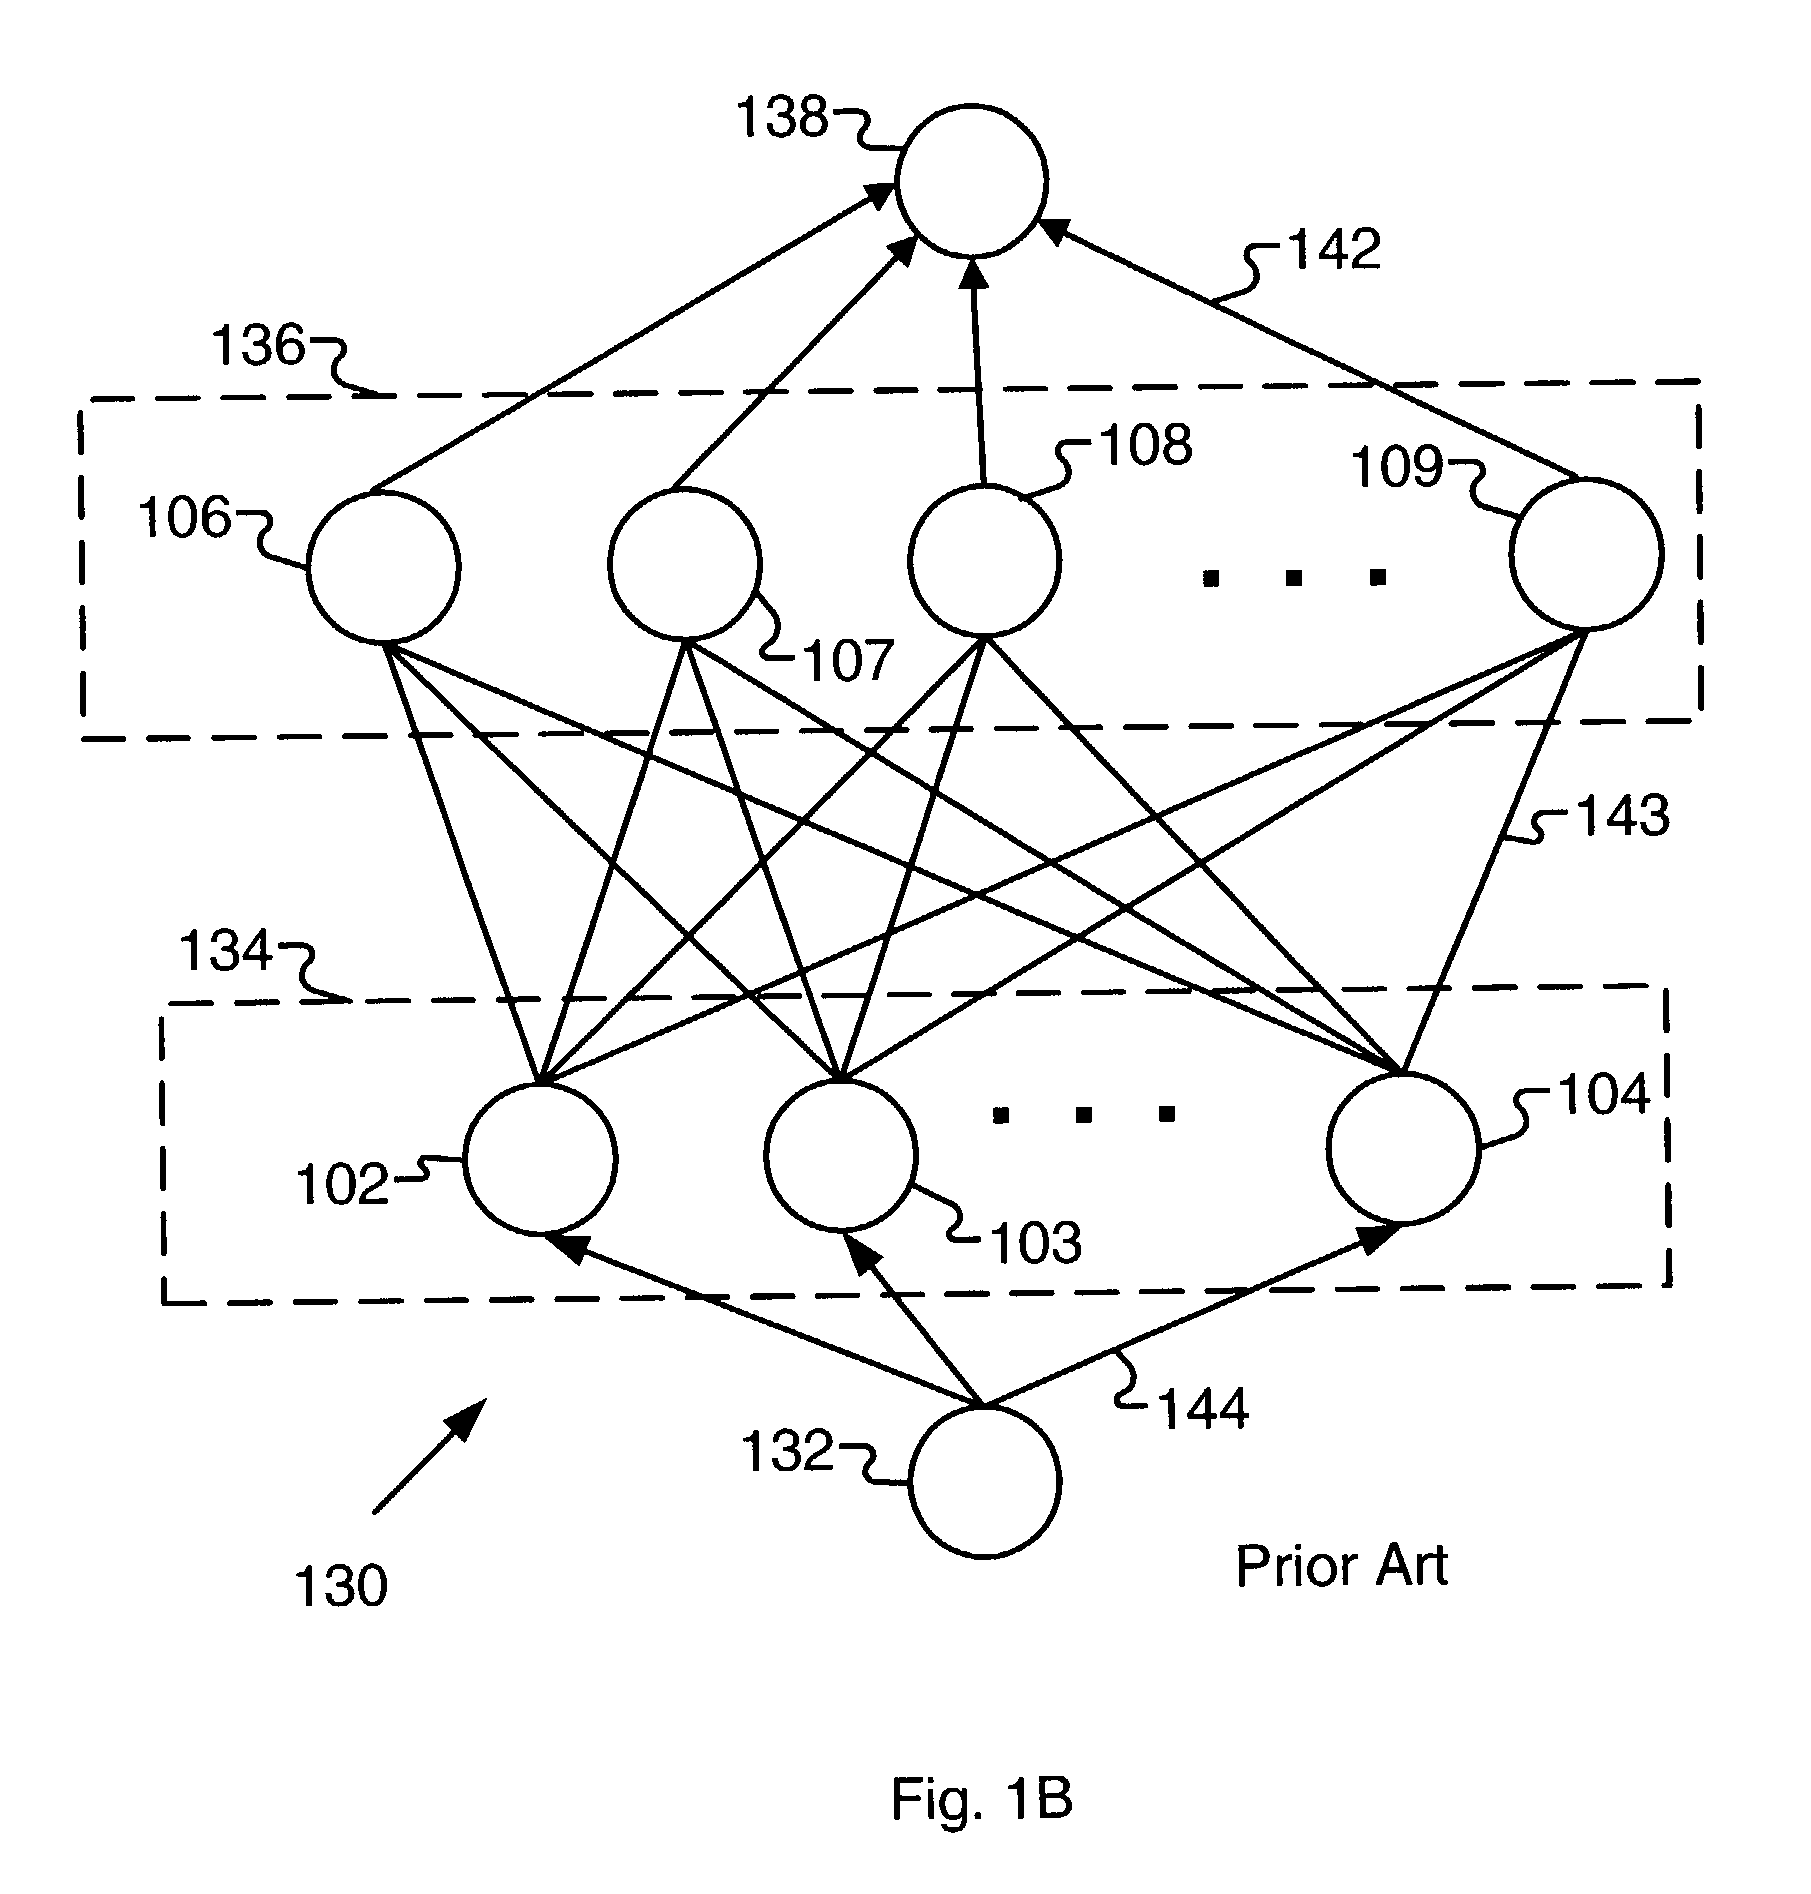 Method for application of network flow techniques under constraints